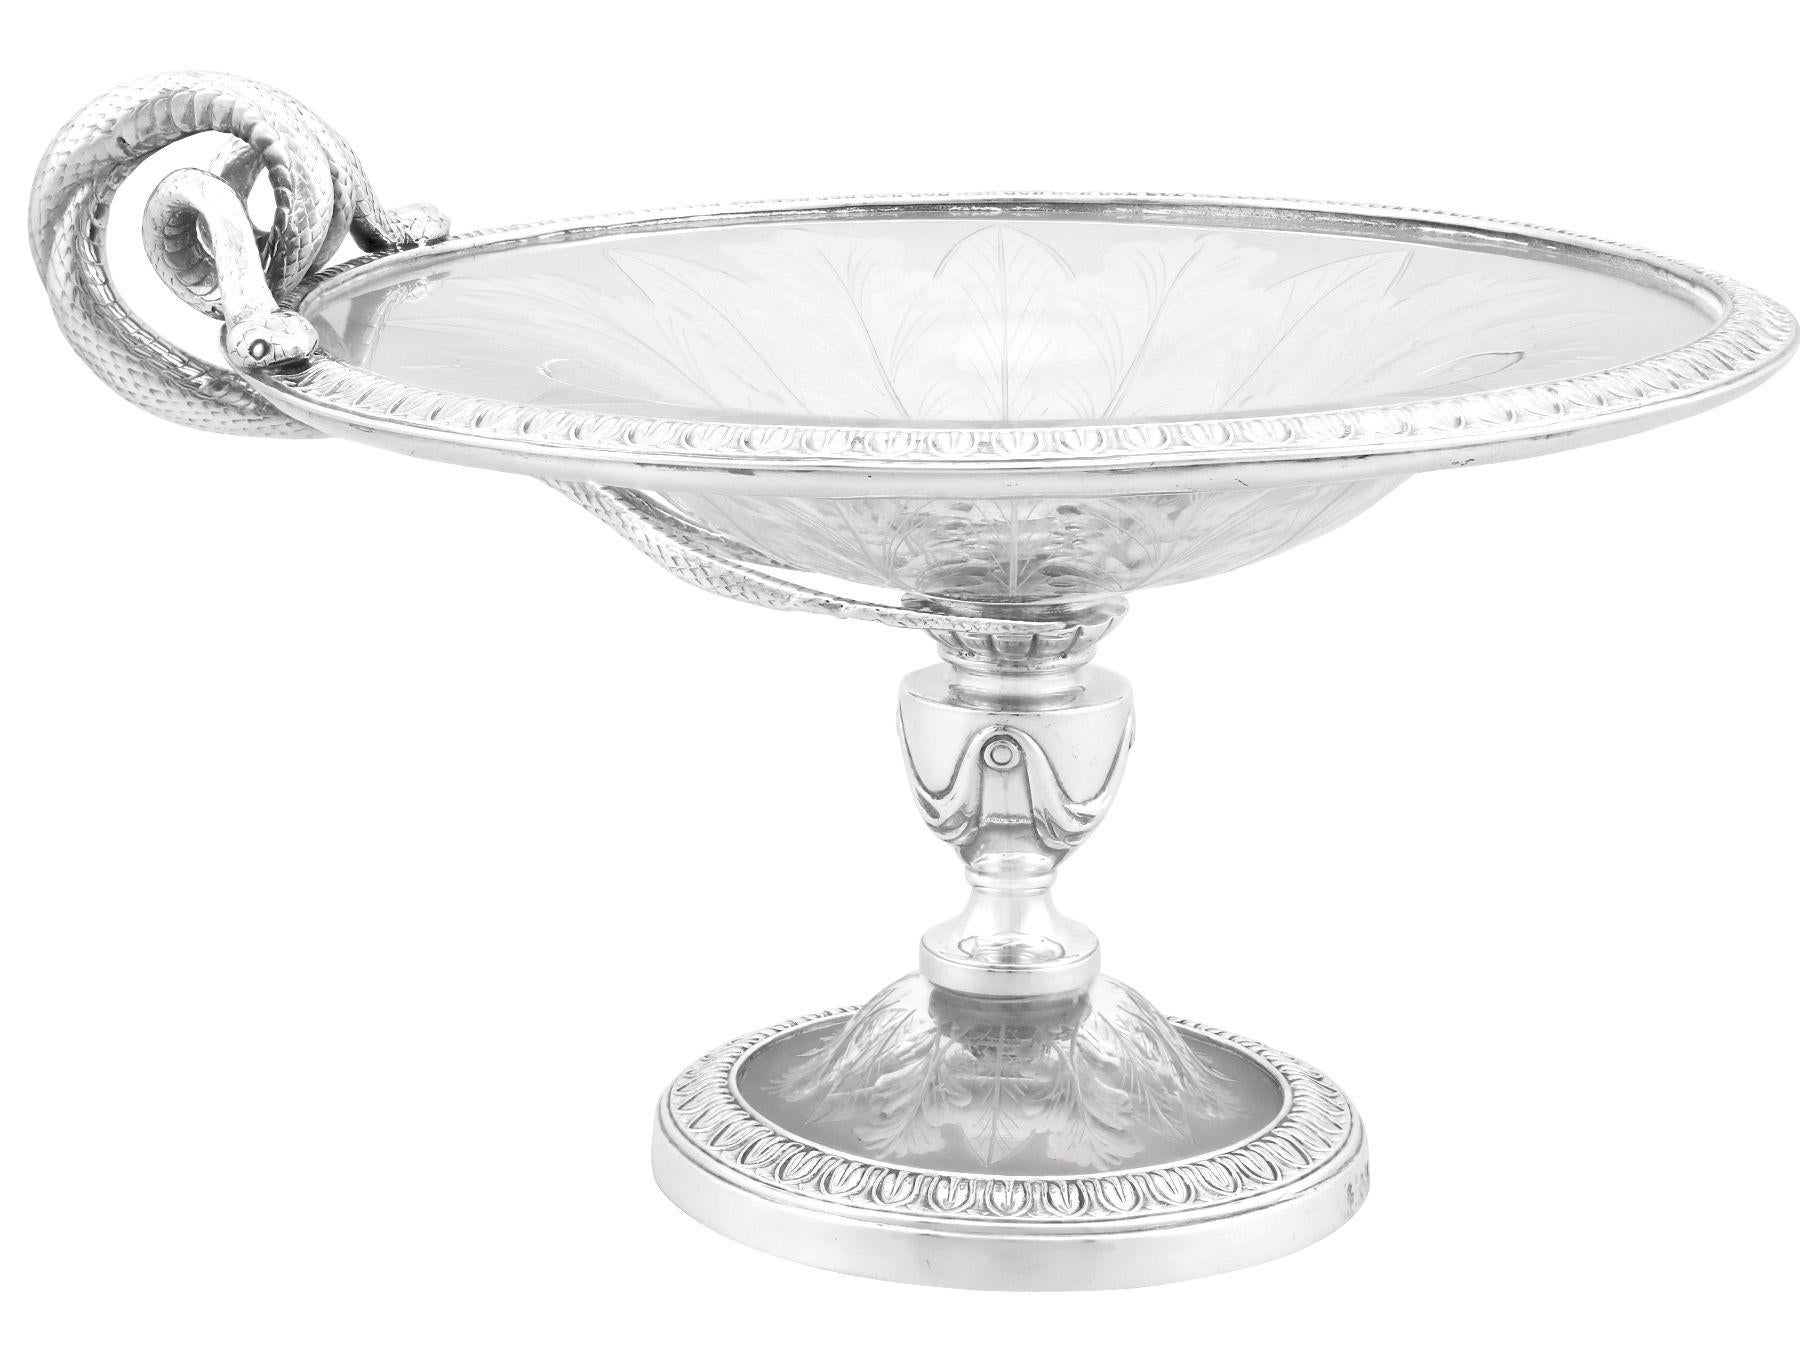 British Antique Victorian Sterling Silver and Glass Tazzas/Centrepieces For Sale